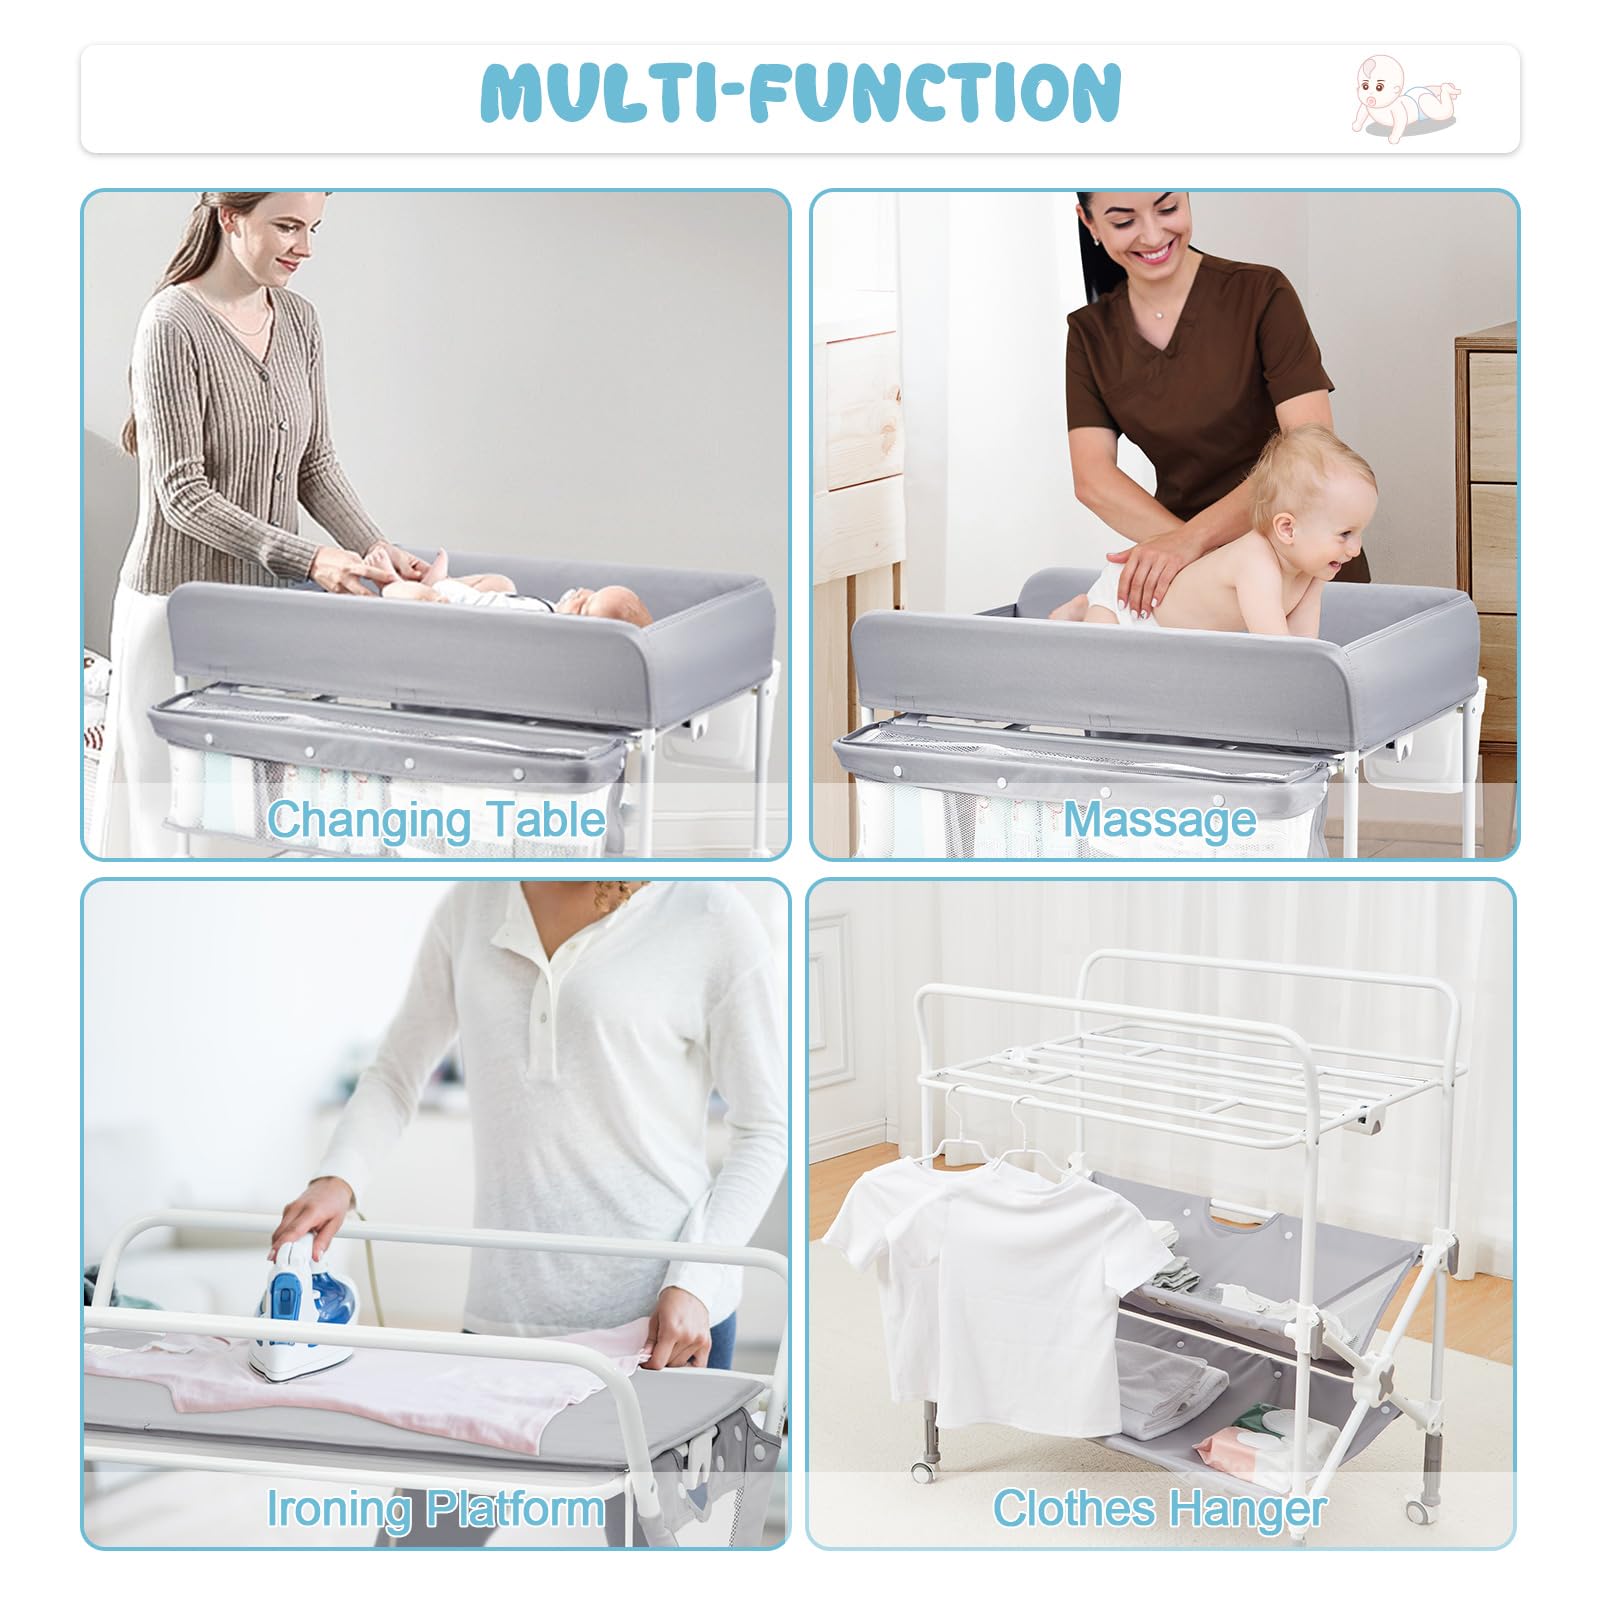 Portable Baby Changing Table, Foldable Diaper Change Table with Wheels, Adjustable Height, Cleaning Bucket, Changing Station for Infant Mobile Nursery Organizer for Newborn